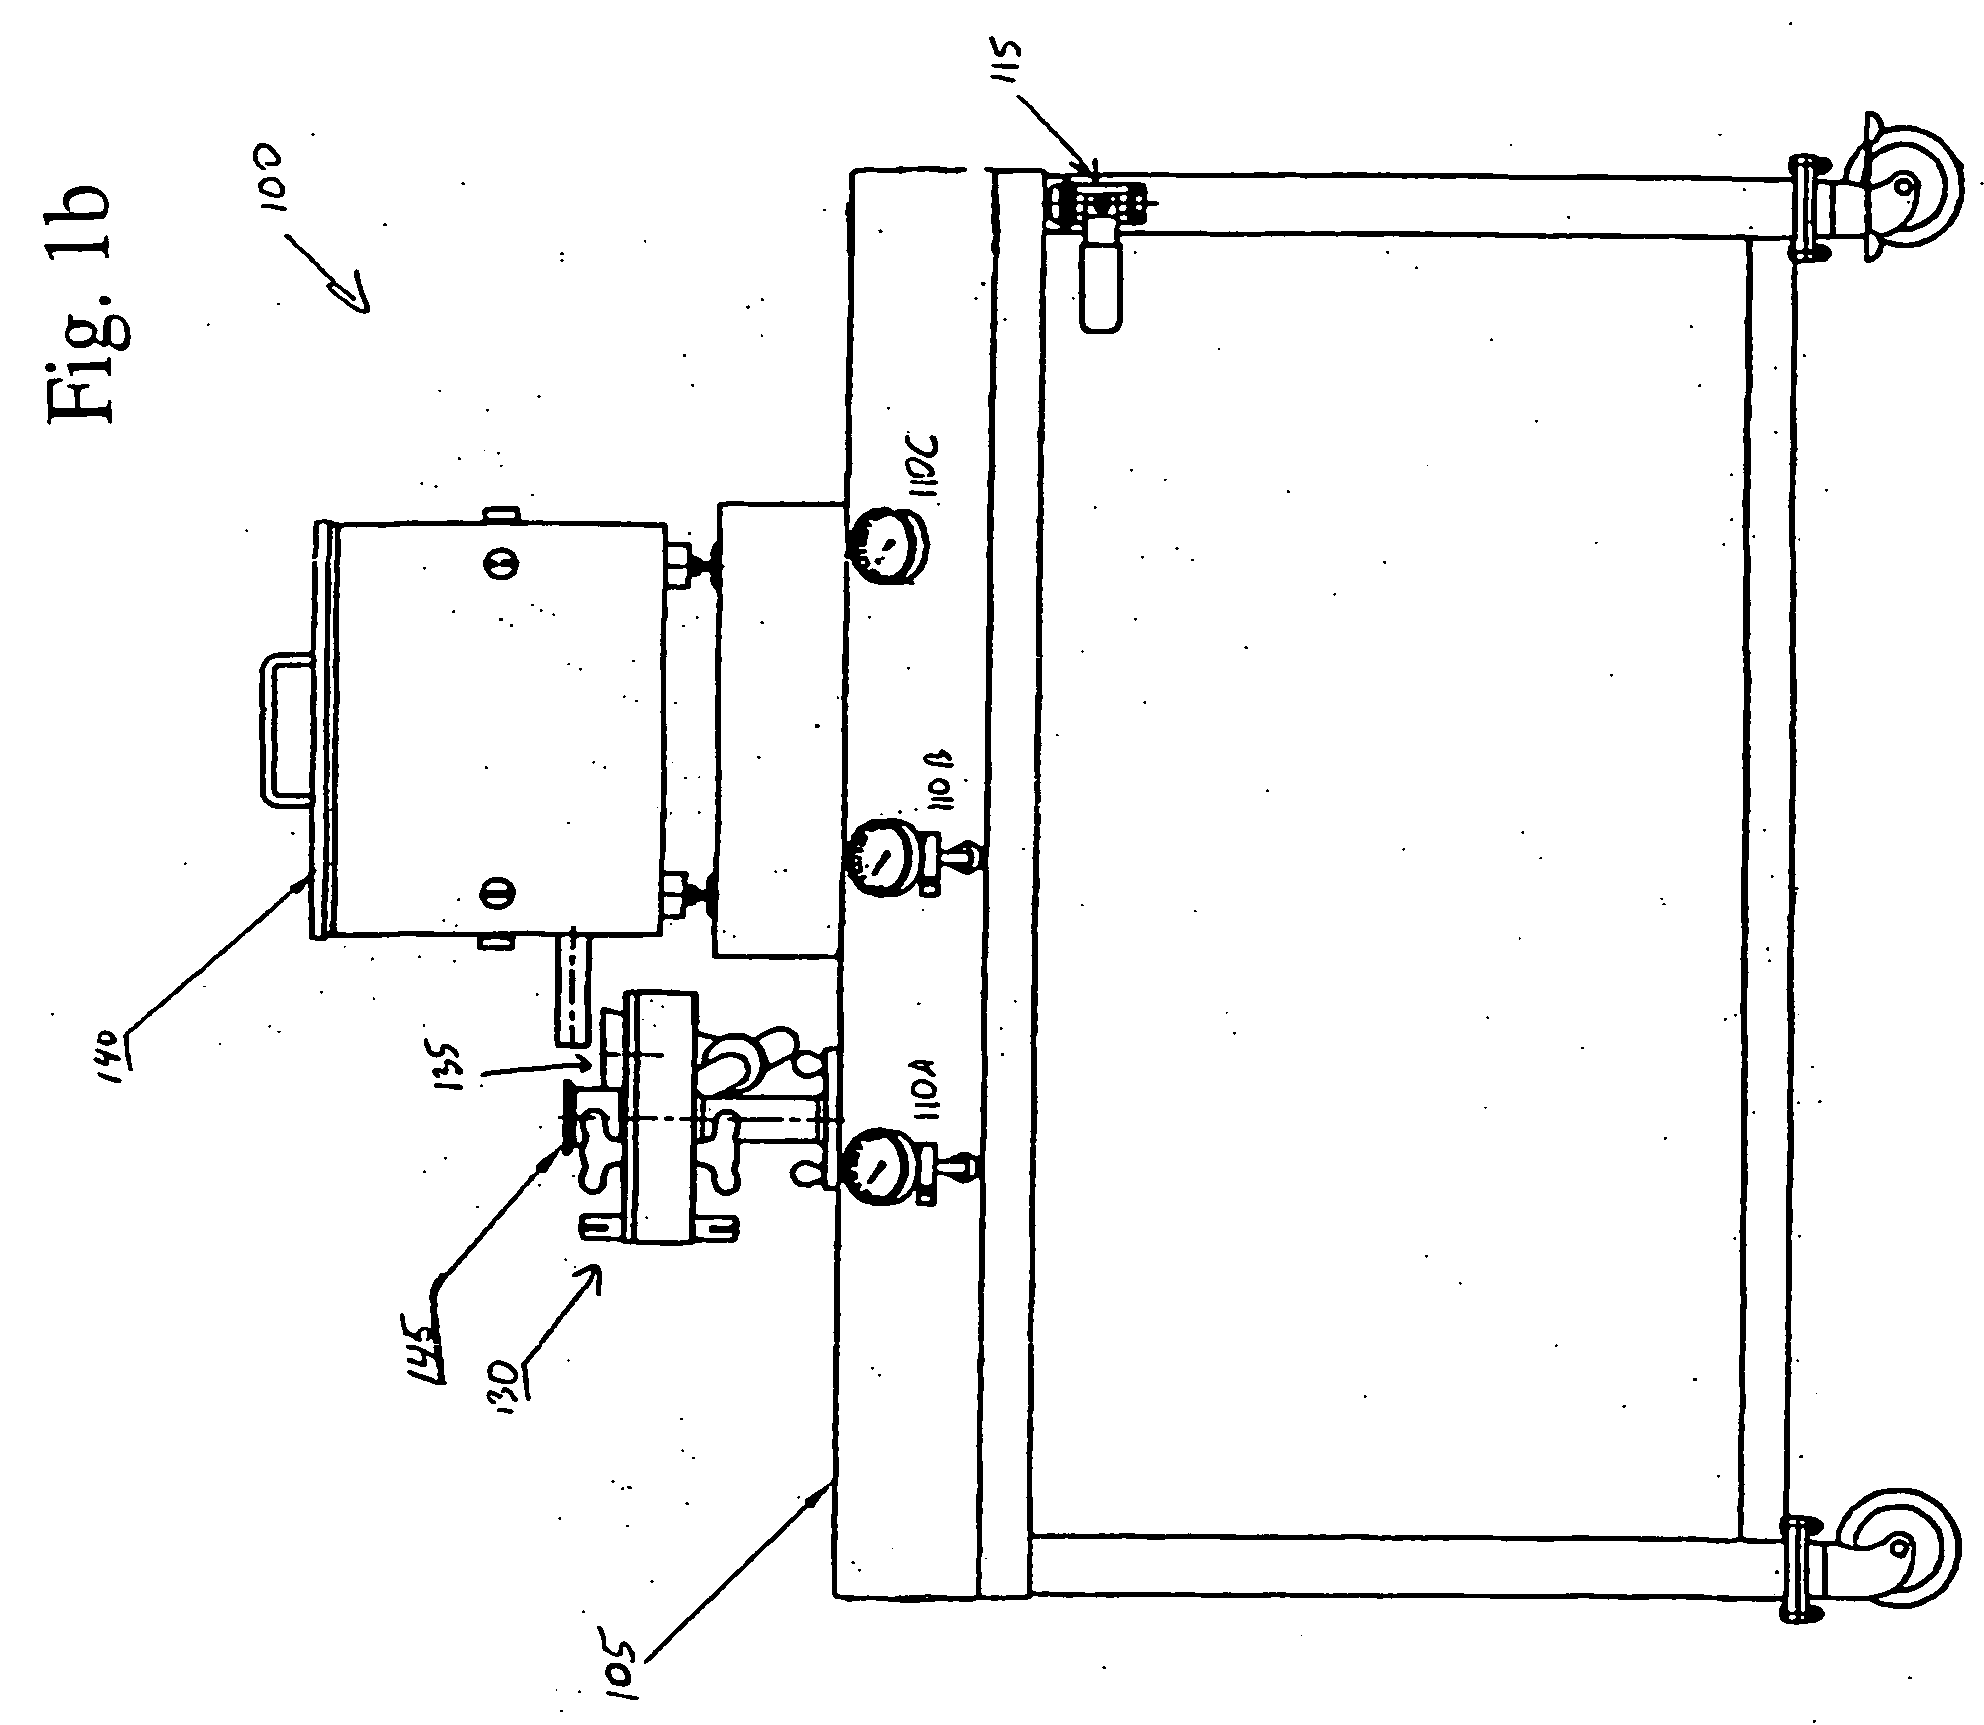 Particle packaging systems and methods